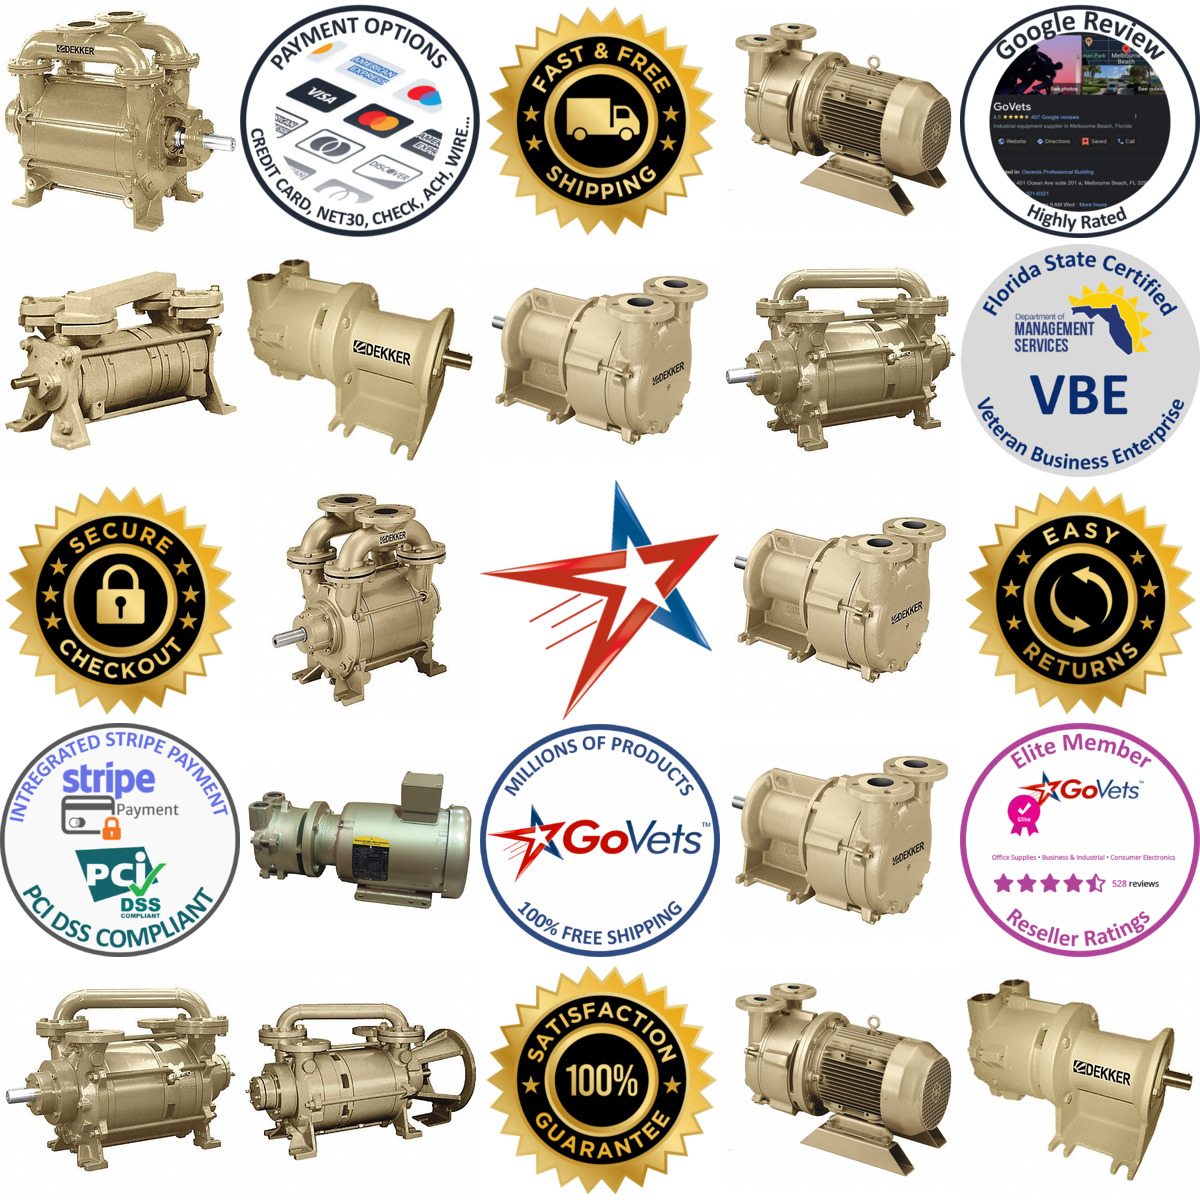 A selection of Liquid Ring Vacuum Pumps products on GoVets